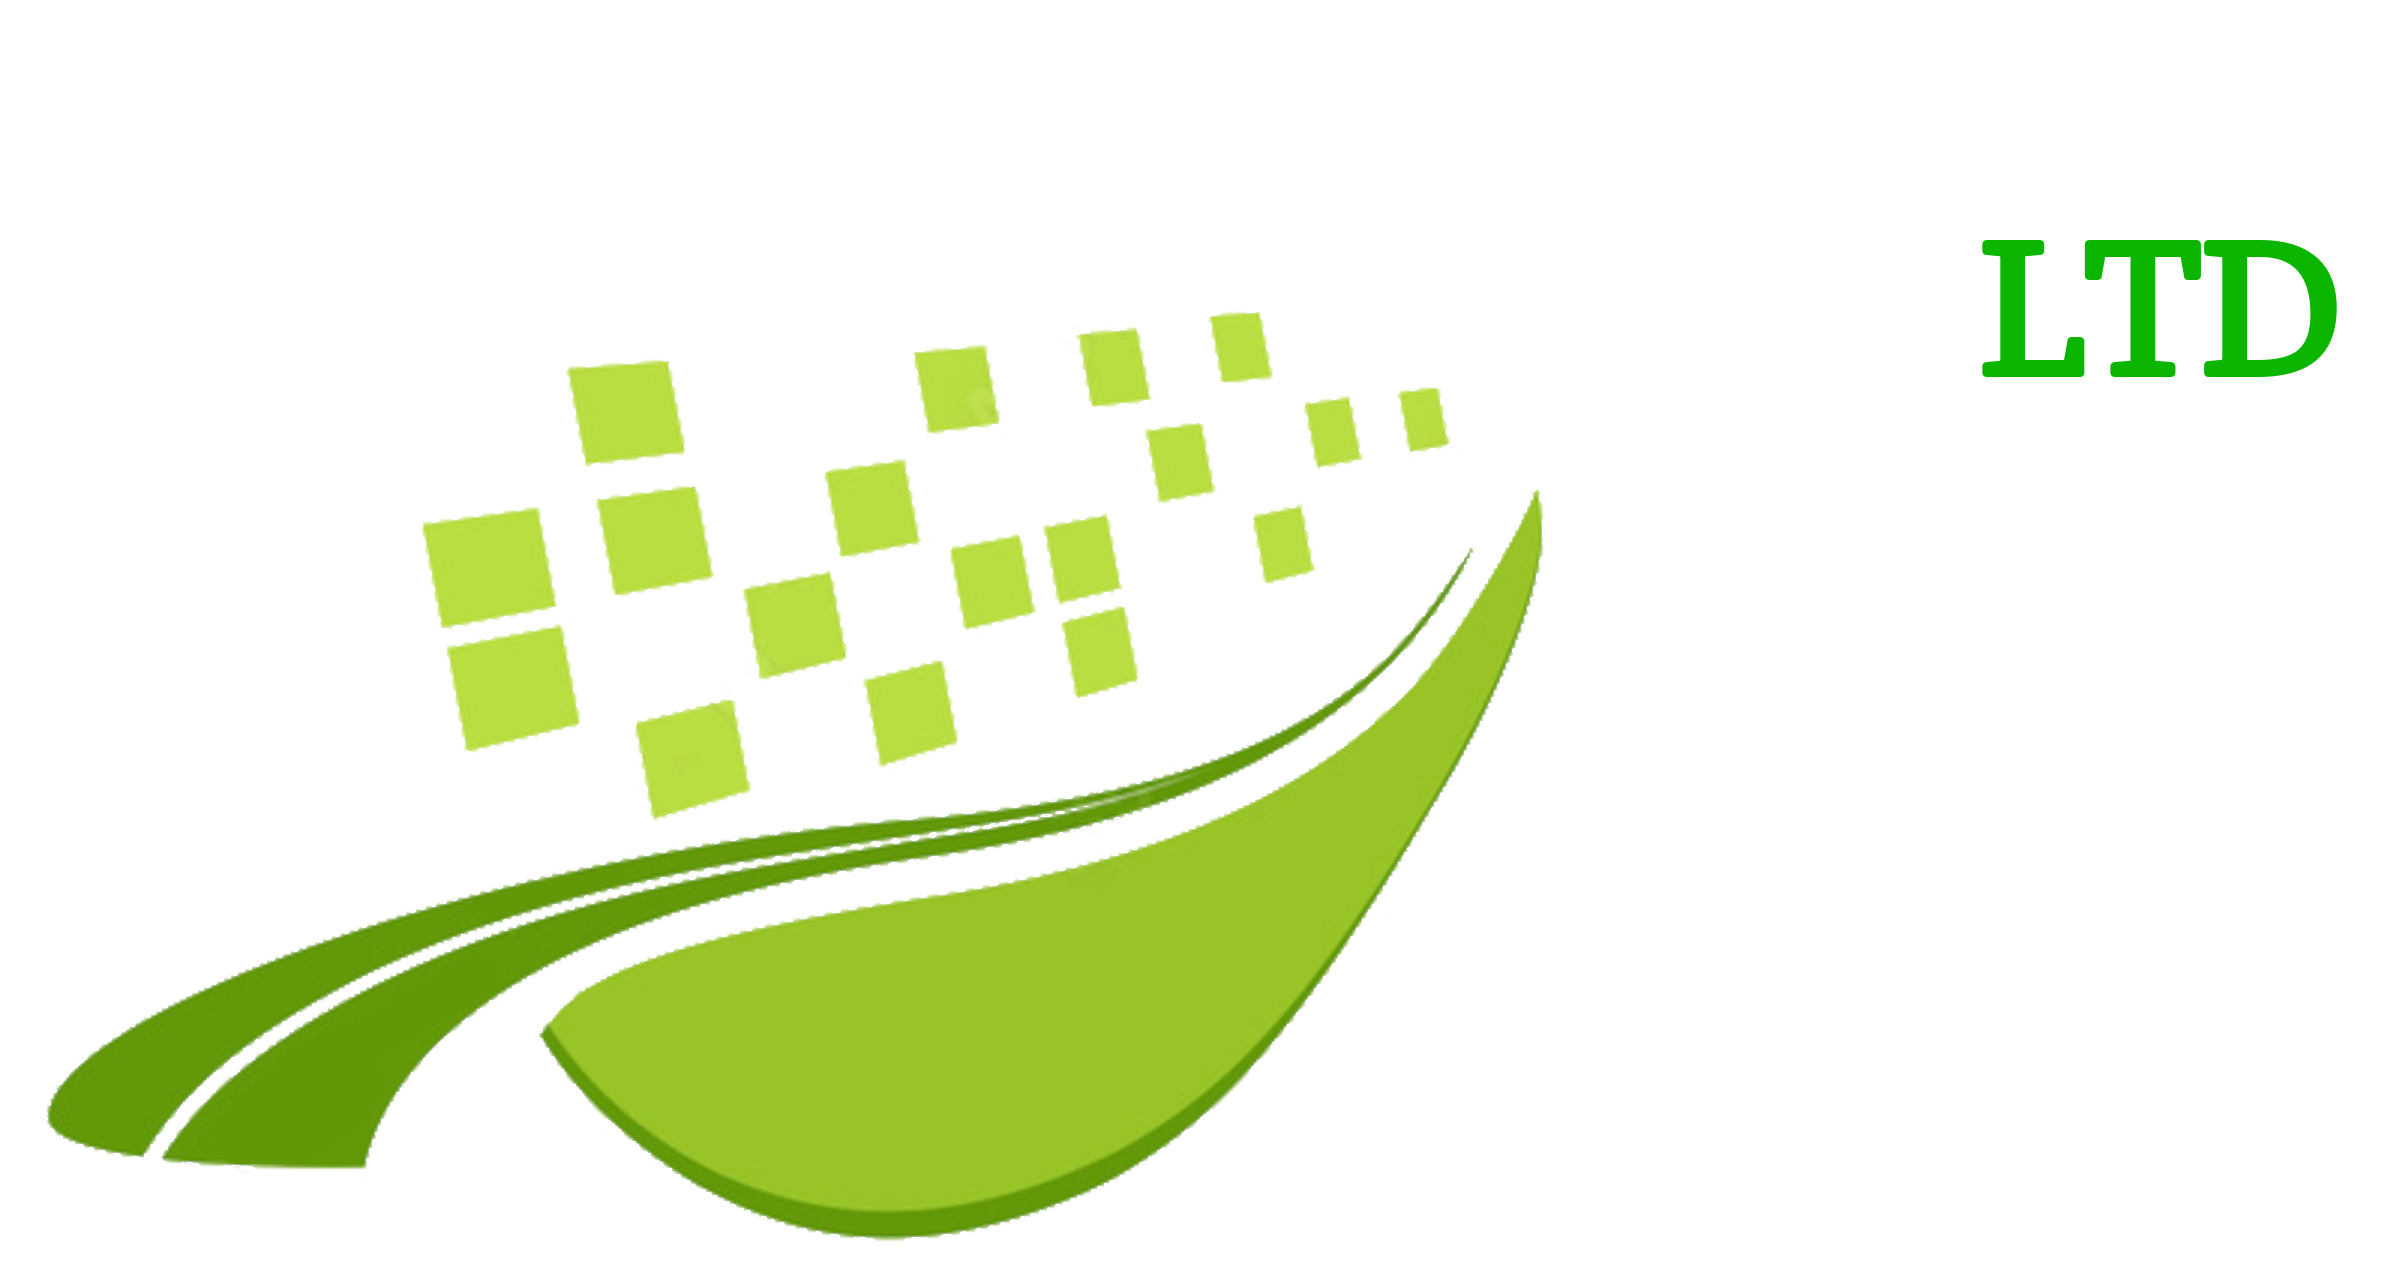 Ecological Building Group